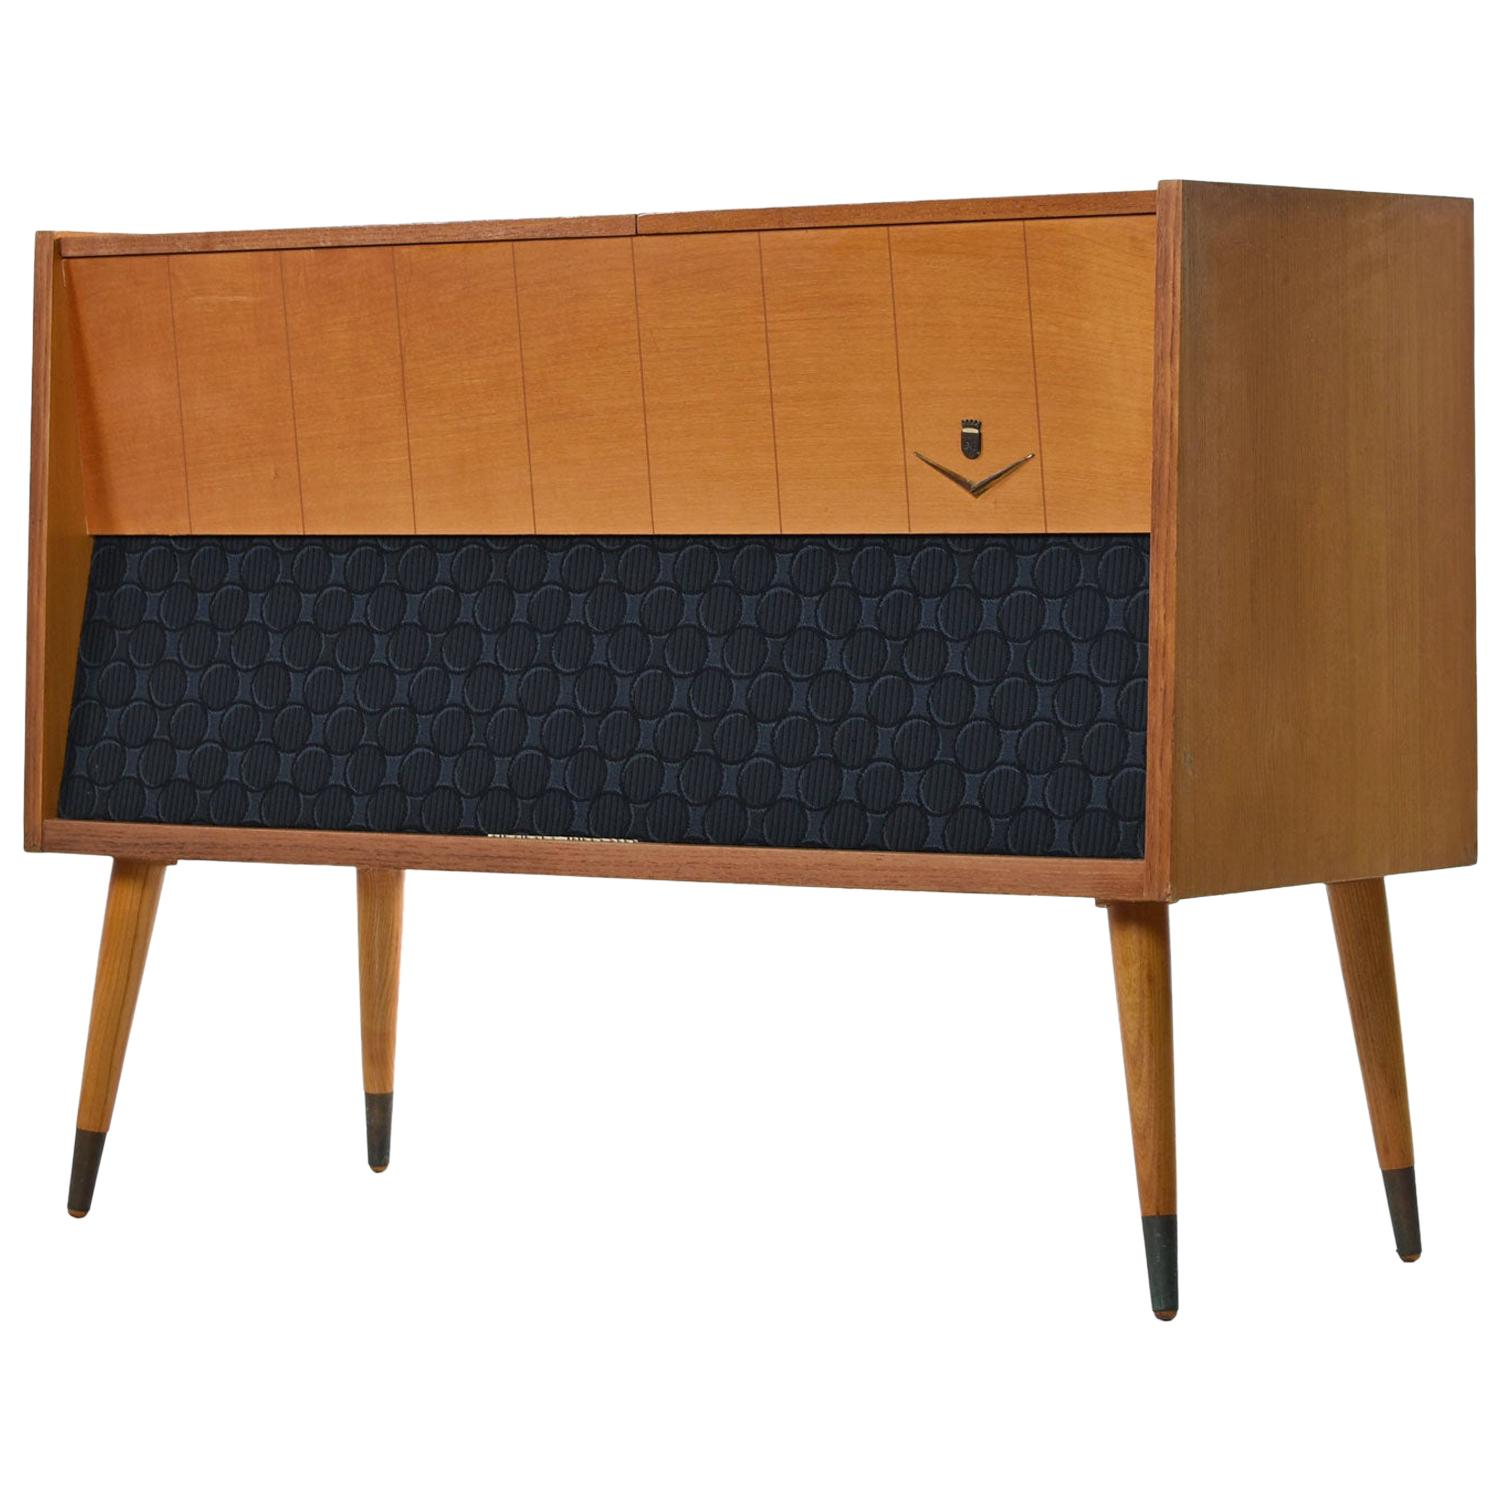 Lovingly restored Grundig Majestic console stereo. Not only does this 1950s German modern Rockabilly style cabinet look beautiful, but it sounds great. Audiophiles and casual listeners will both appreciate the presence and warm sounds created by the